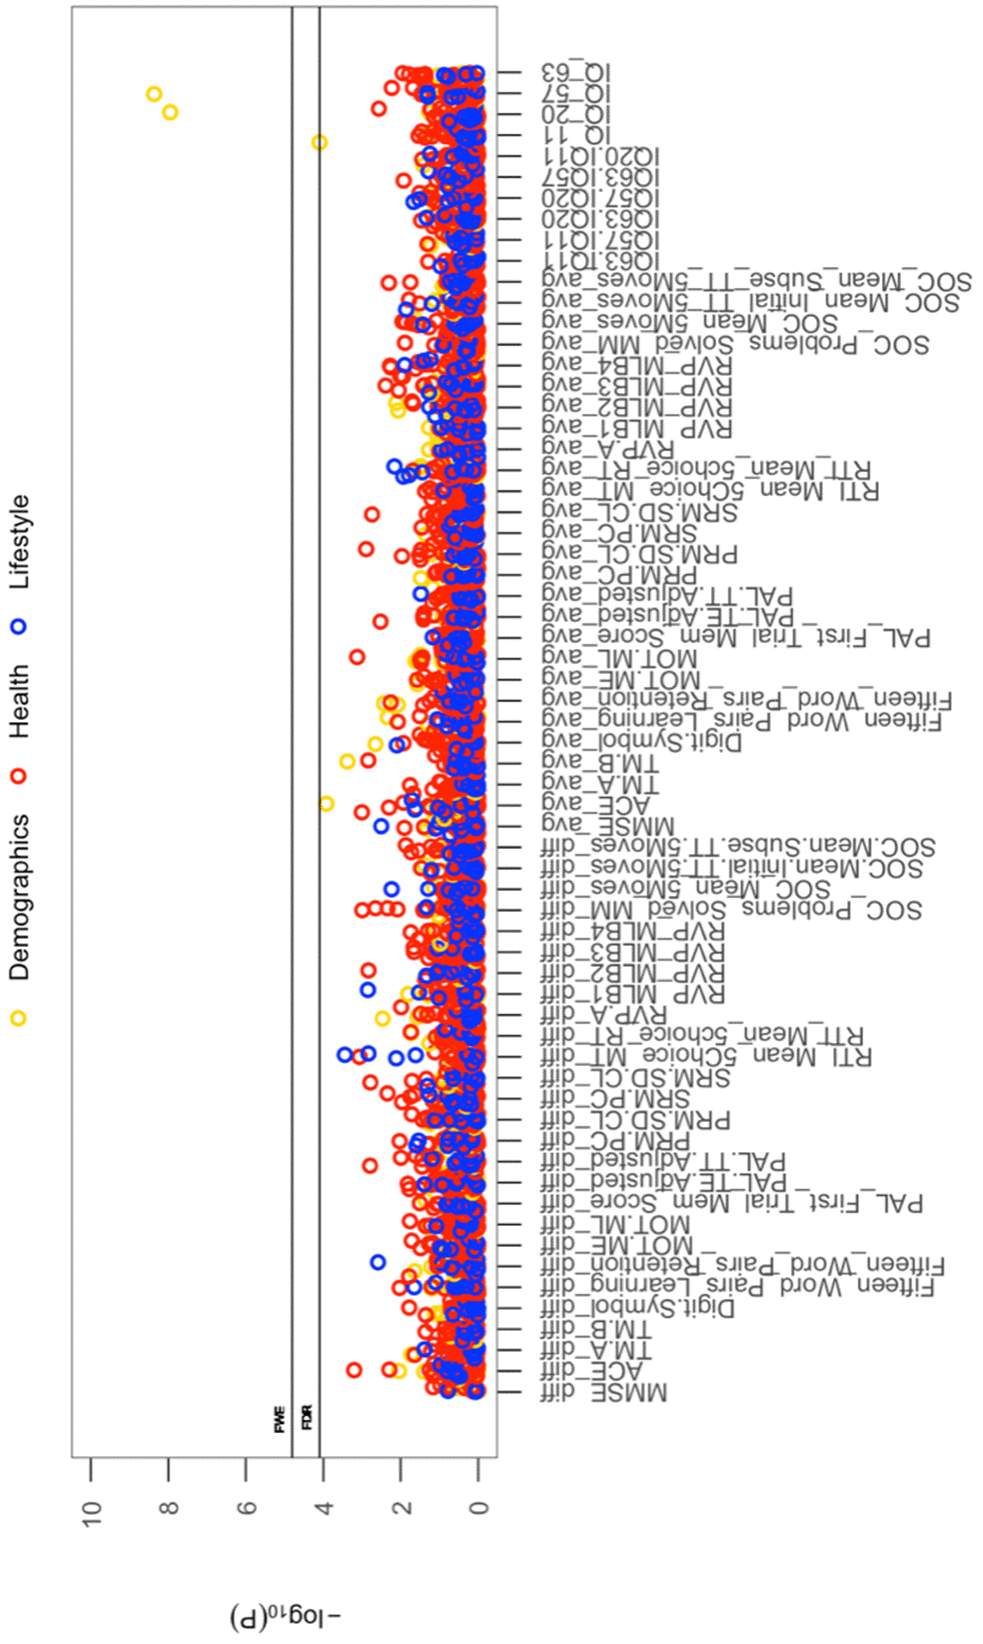 The significance of associations between each longitudinal/average cognitive measure and all (other) cross-sectional behavioural variables. The Manhattan plot shows all results for 64 cognitive variables against each of the 50 (other) behavioural variables (3200 values) adjusted for confounders: age, motion, and head size. Significance is plotted as -log 10 p-values, arranged by cognitive variables on the x-axis, multiple testing thresholds across all pairwise associations are marked with a horizontal line, FWE top line (4.80 x 10-4) and FDR bottom line (4.09 x 10-4). All other behavioural variables are distinguished by plotting colour (Demographic = yellow, Health = red, Lifestyle = blue). Abbreviations: IQ-11, IQ-20, IQ-57, IQ-63 = general intelligence score at ages ~11, ~20, ~57, and ~63; MOT = motor task; ME = mean error; ML = mean latency; PAL = paired associates learning; TE adjusted = total errors adjusted; TT Adjusted = total trials adjusted; PRM = pattern recognition memory; SD = standard deviation; CL = correct latency; RTI = reaction time task; MT = movement time; RT = reaction time; RVP = rapid visual processing task; MLB1-4 = mean latency block 1 to 4; SOC = Stockings of Cambridge; Mean Initial TT 5 Moves = mean initial total time 5 moves task; Mean Subse TT 5 Moves = mean subsequent thinking time 5 moves task; SRM = spatial recognition memory; TM = trail making task).